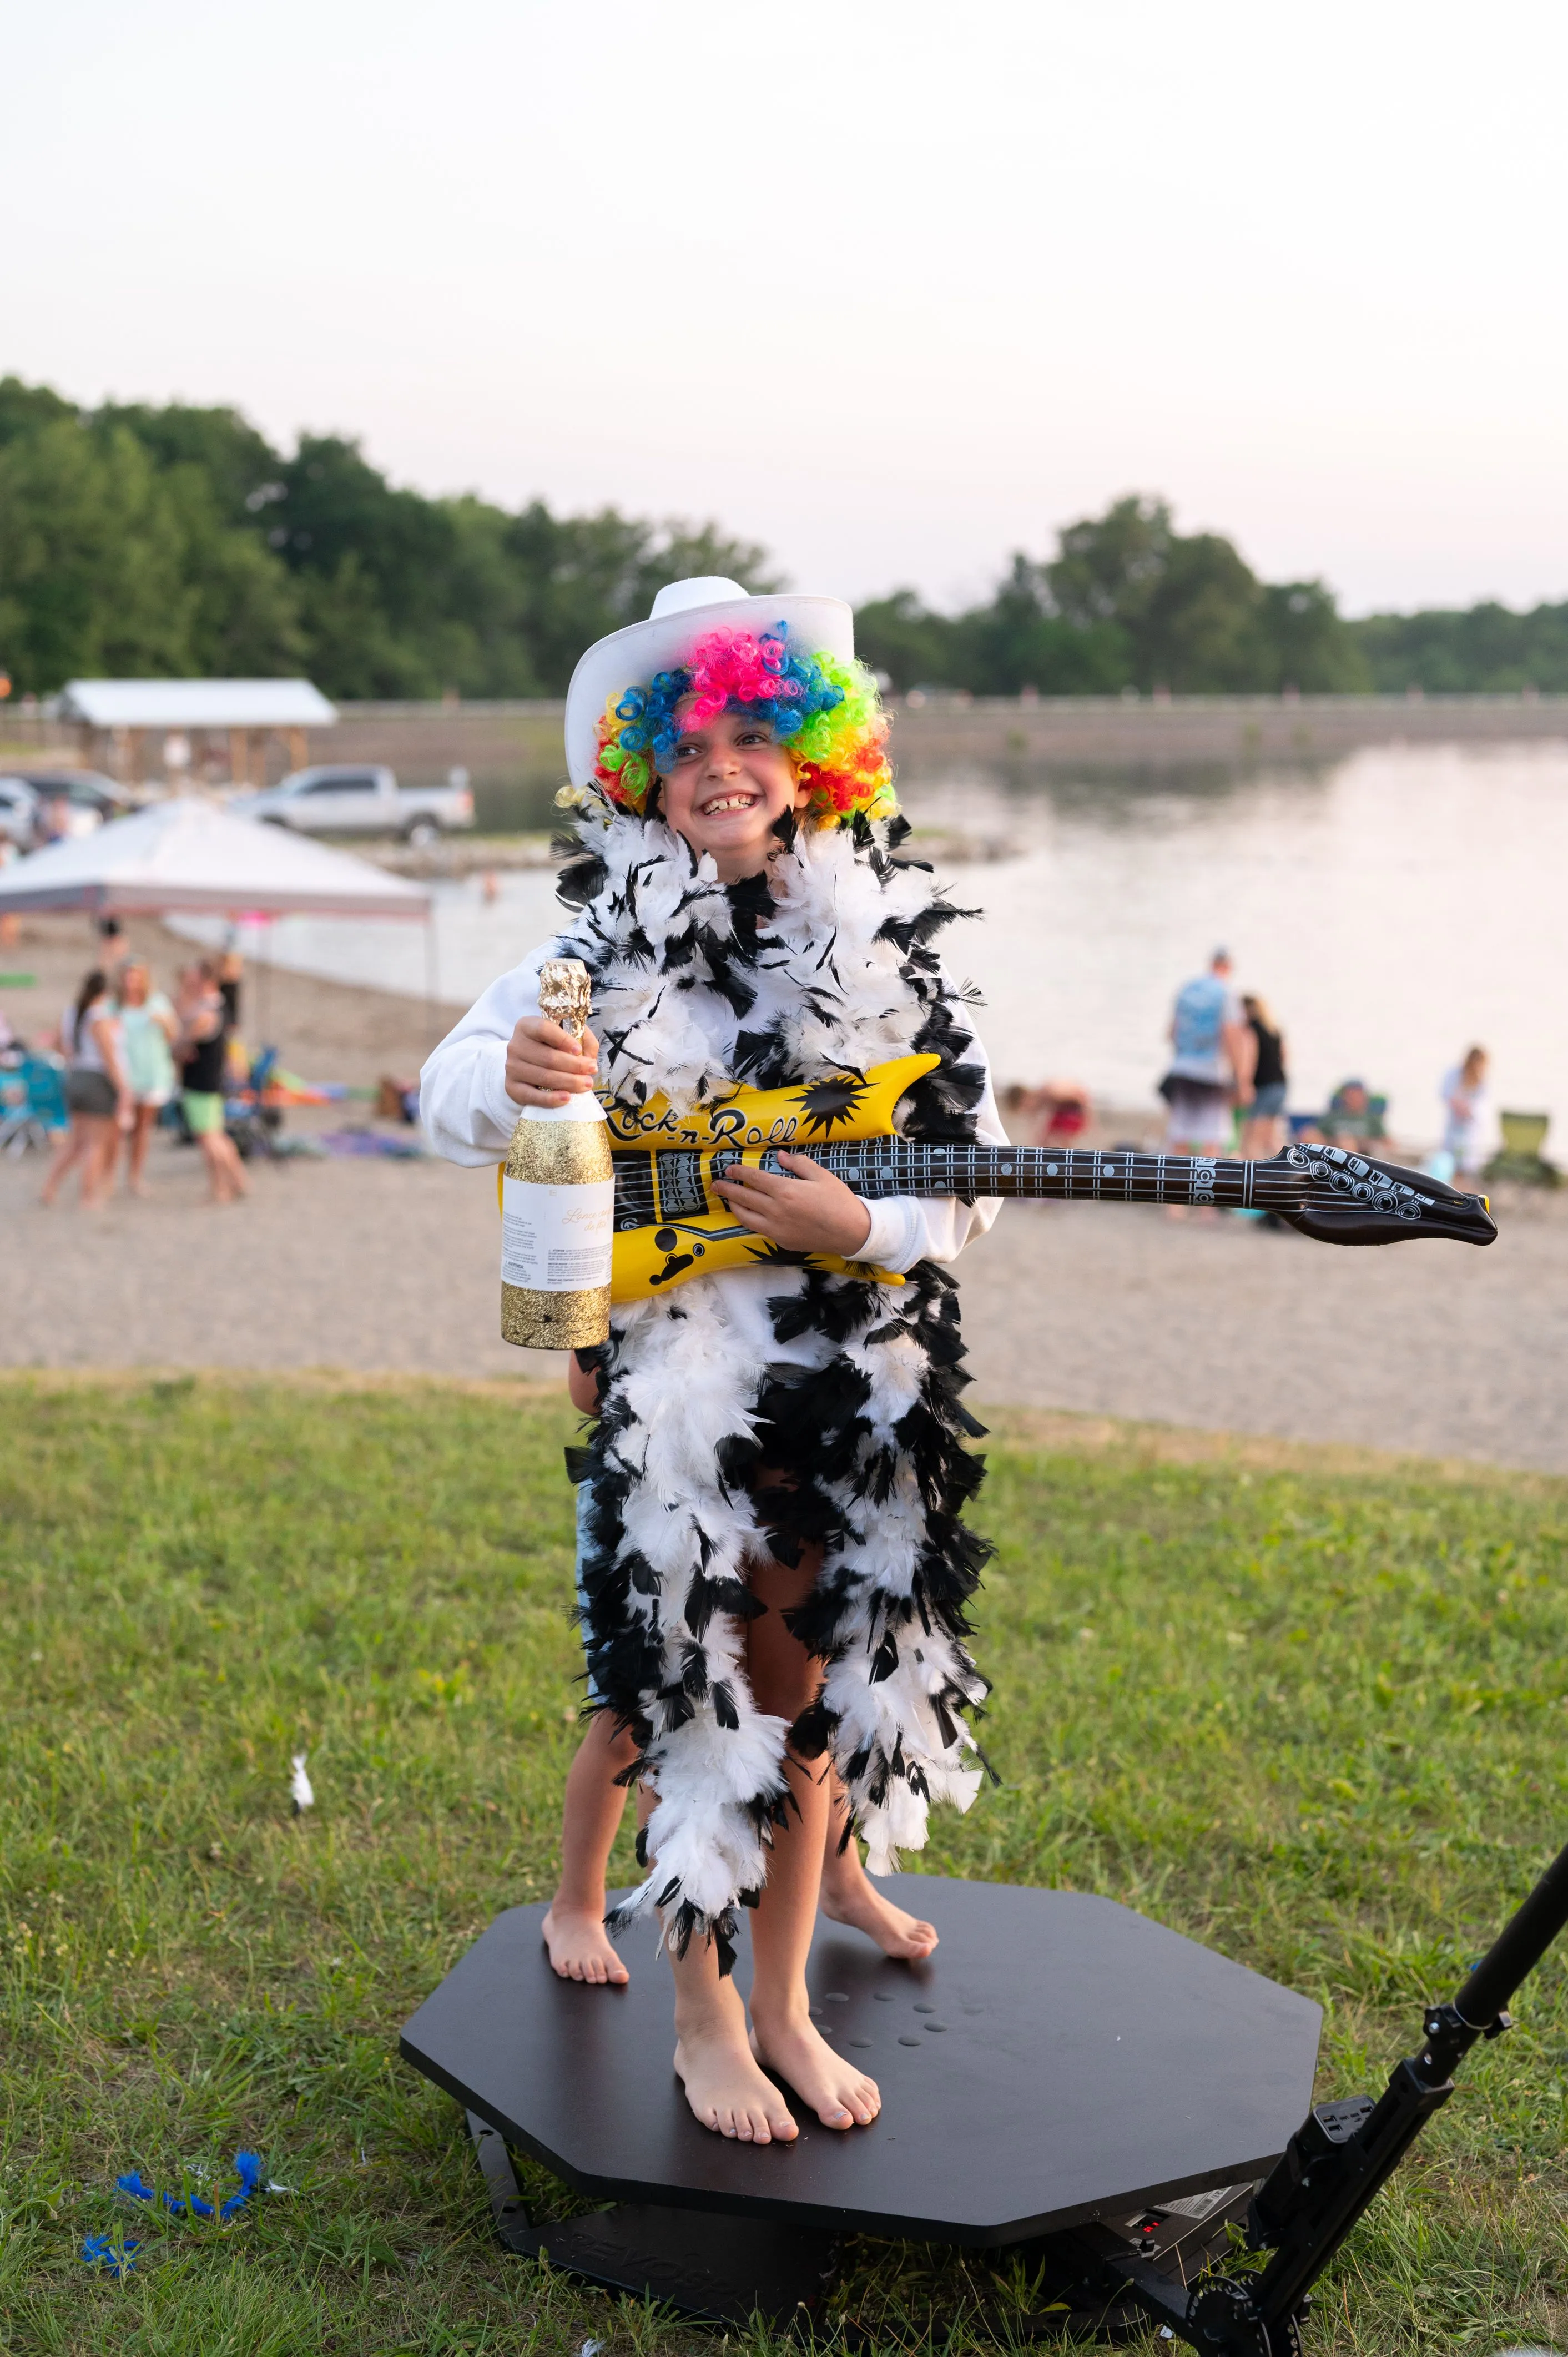 Person in a colorful costume with a hat and feathers, standing on an outdoor stage near a lake with people in the background.